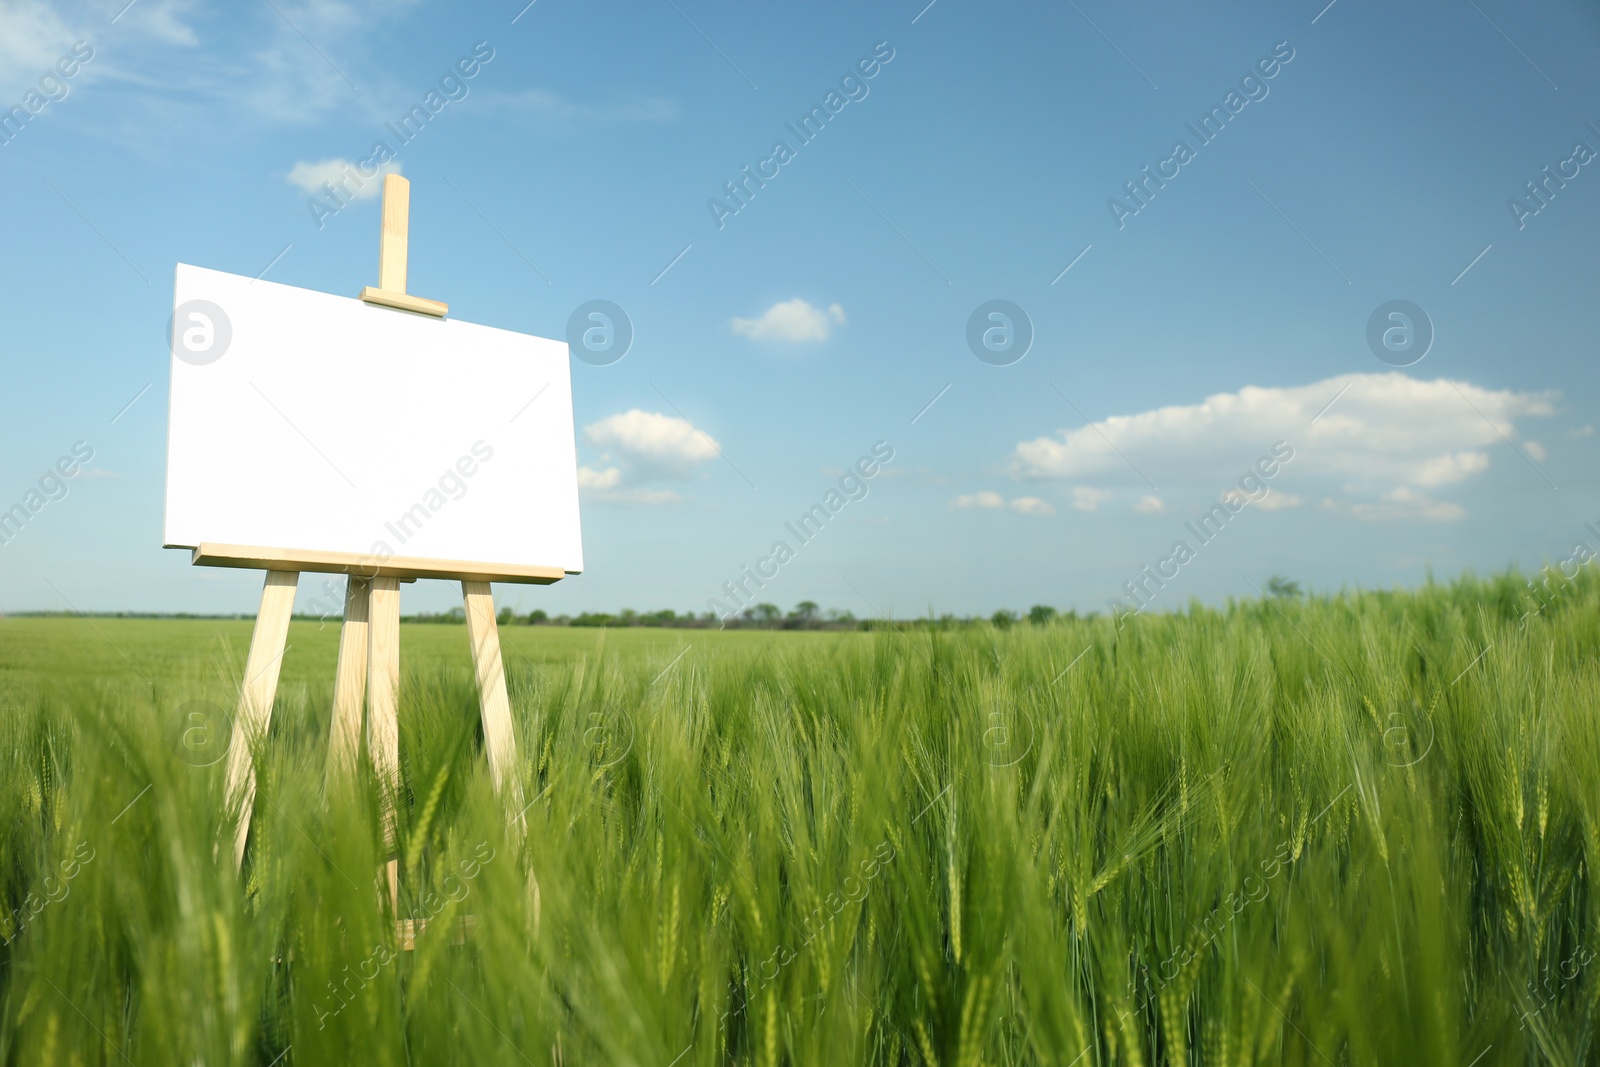 Photo of Wooden easel with blank canvas in picturesque green field on sunny day. Space for text